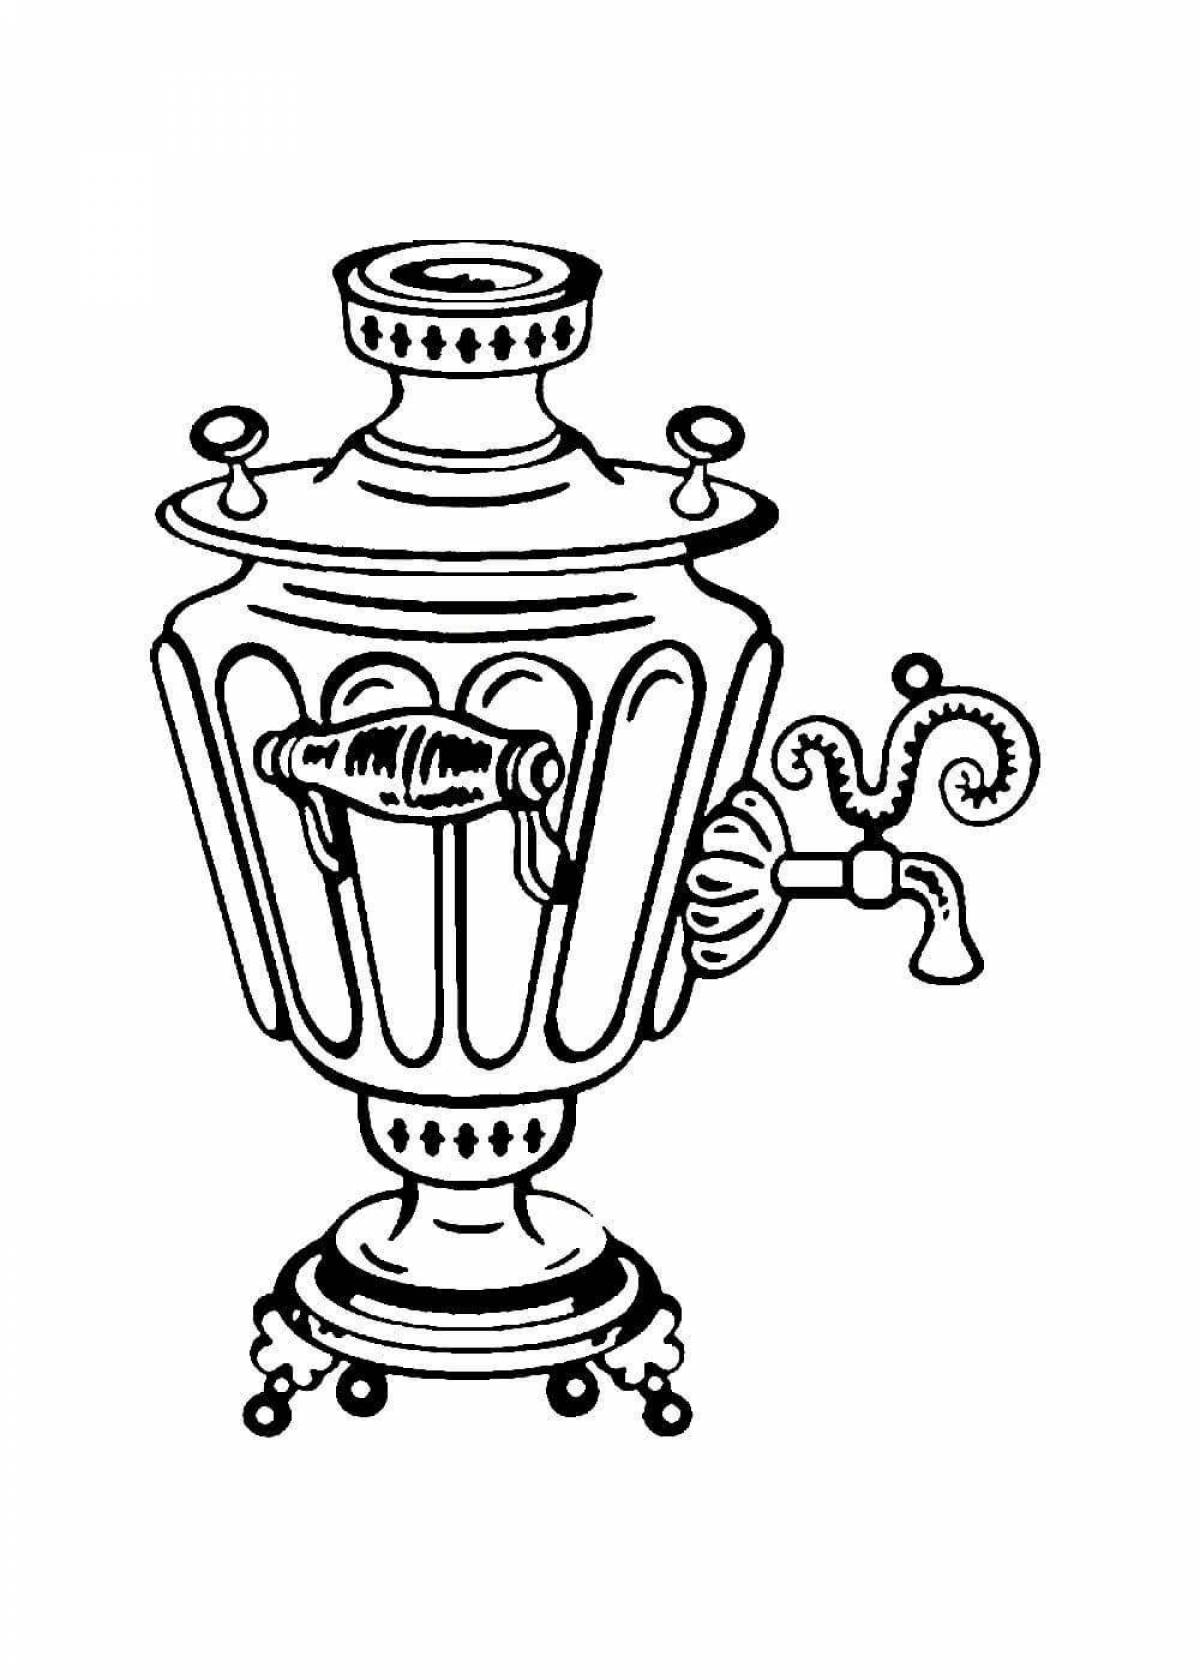 Cute samovar coloring pages for kids